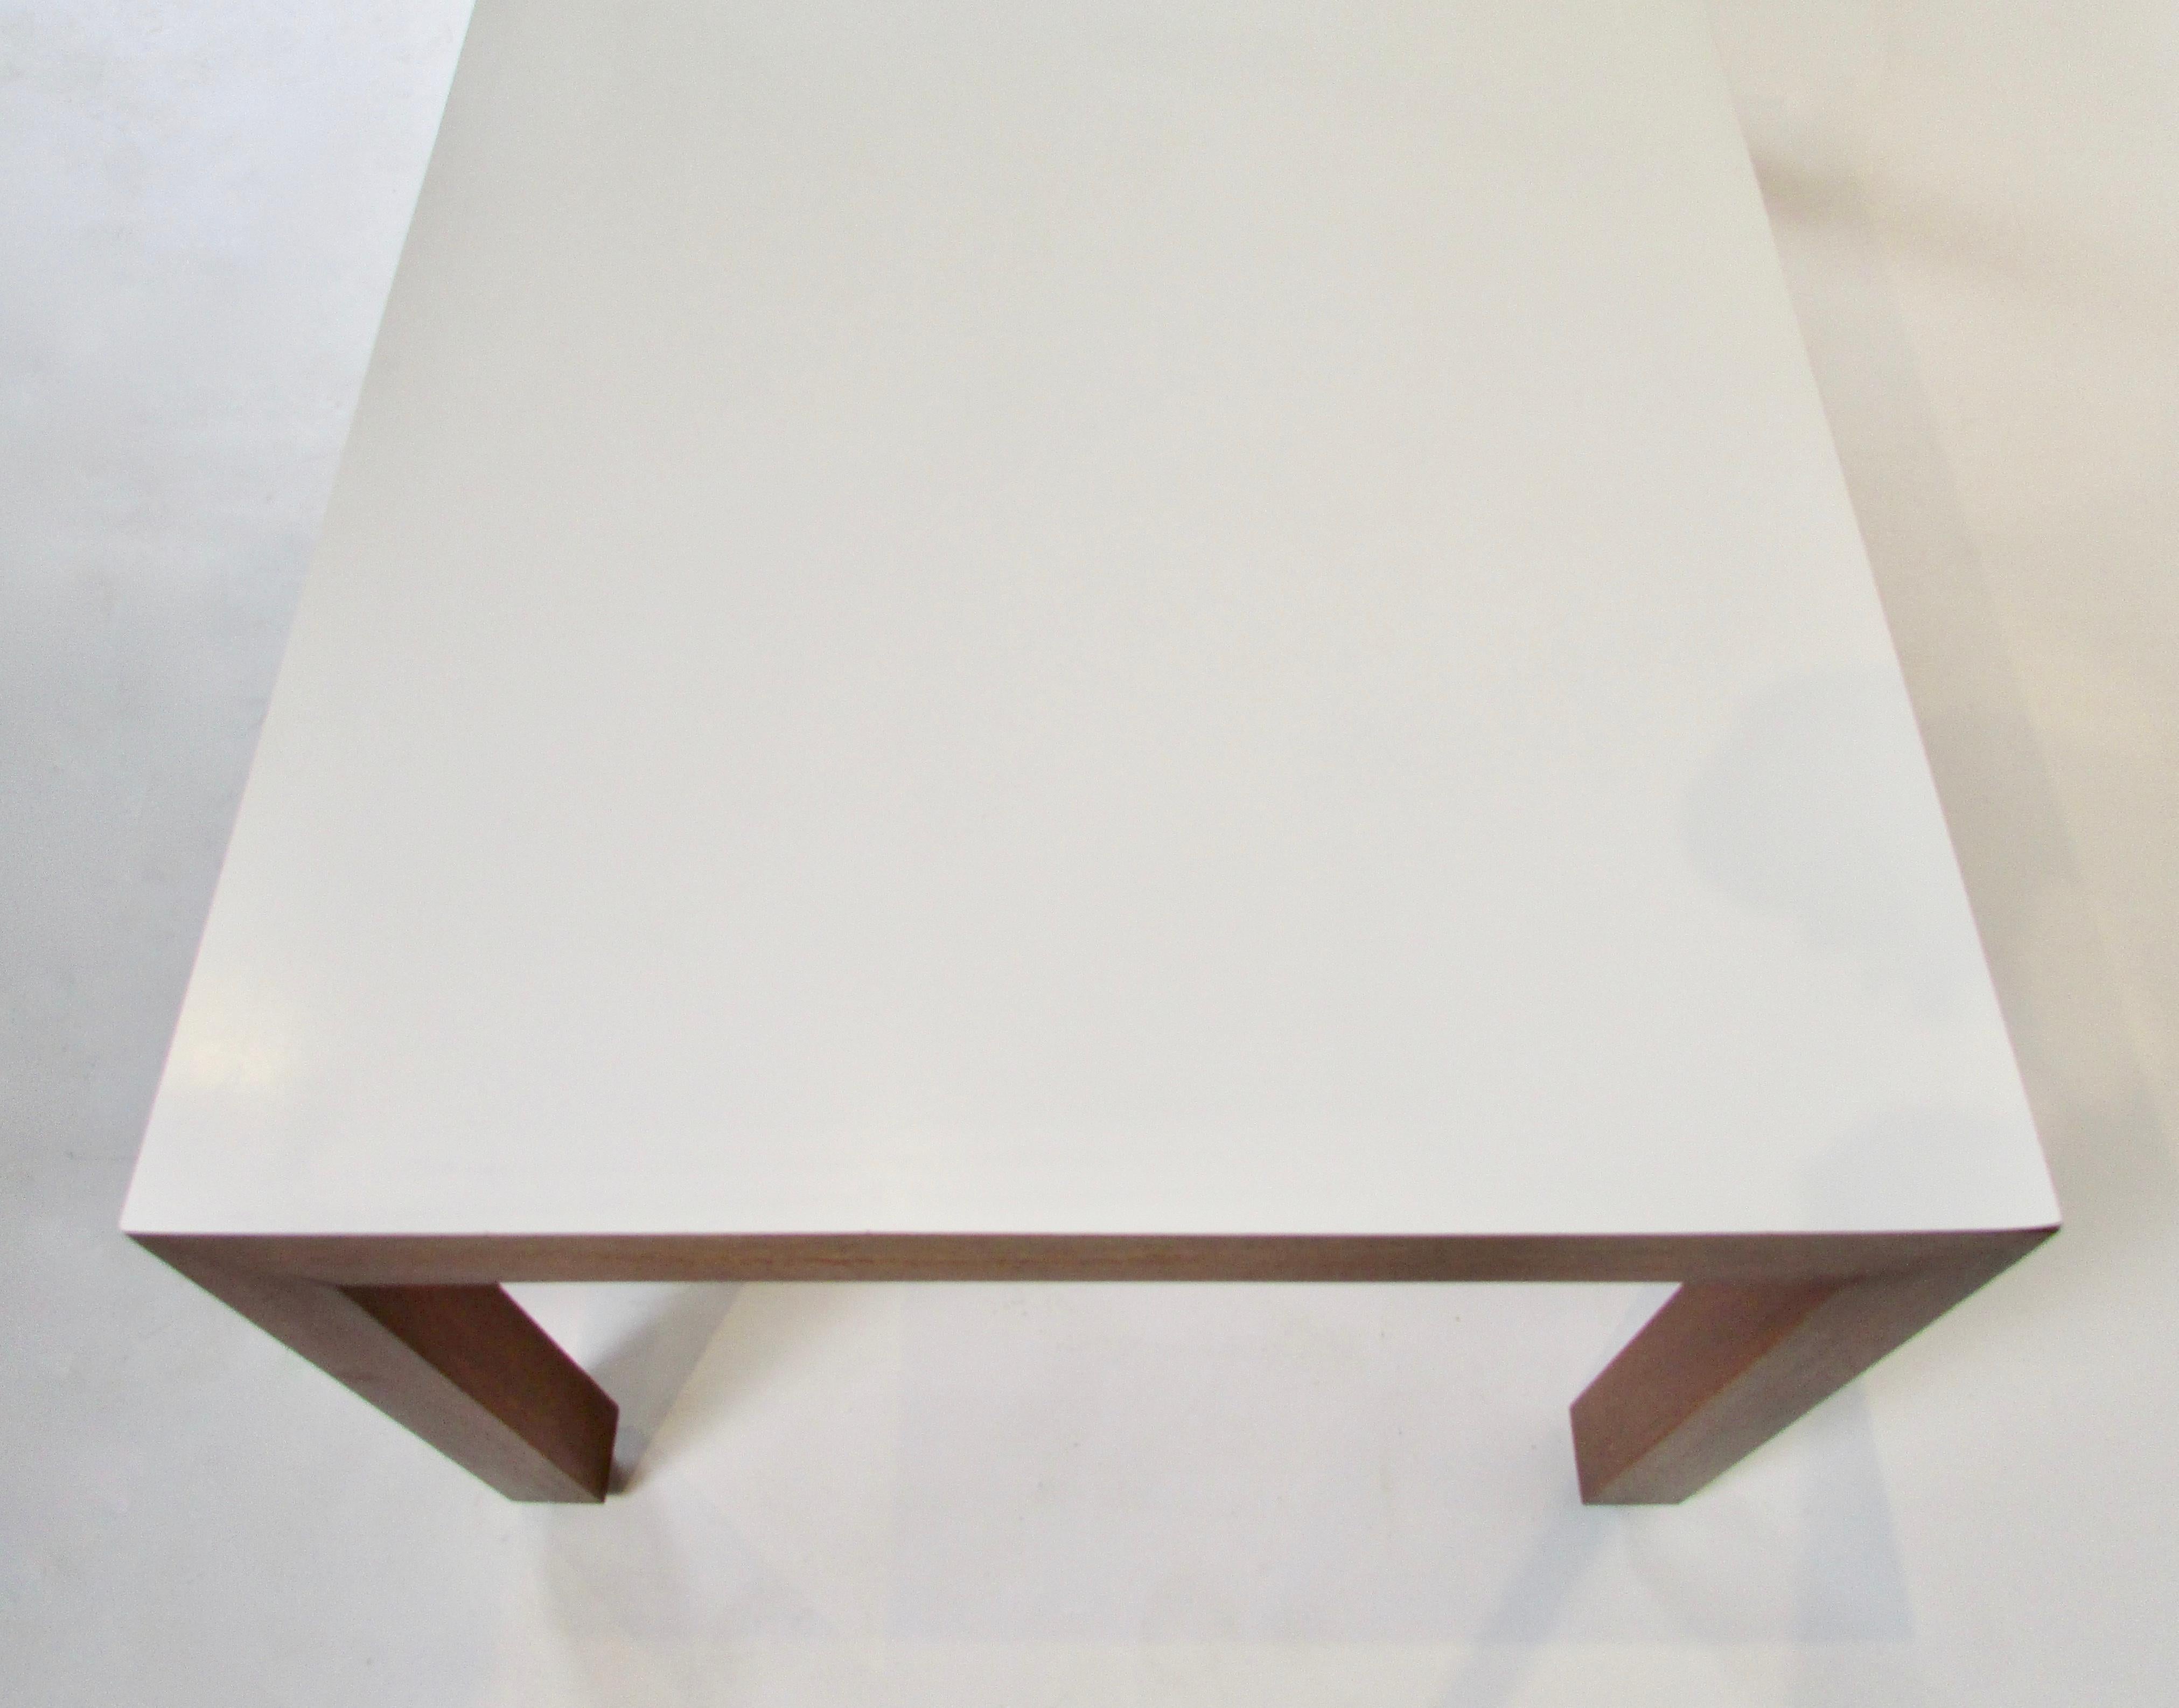 1960s Rectangular Wood Coffee Table with White Formica Laminate Top For Sale 4